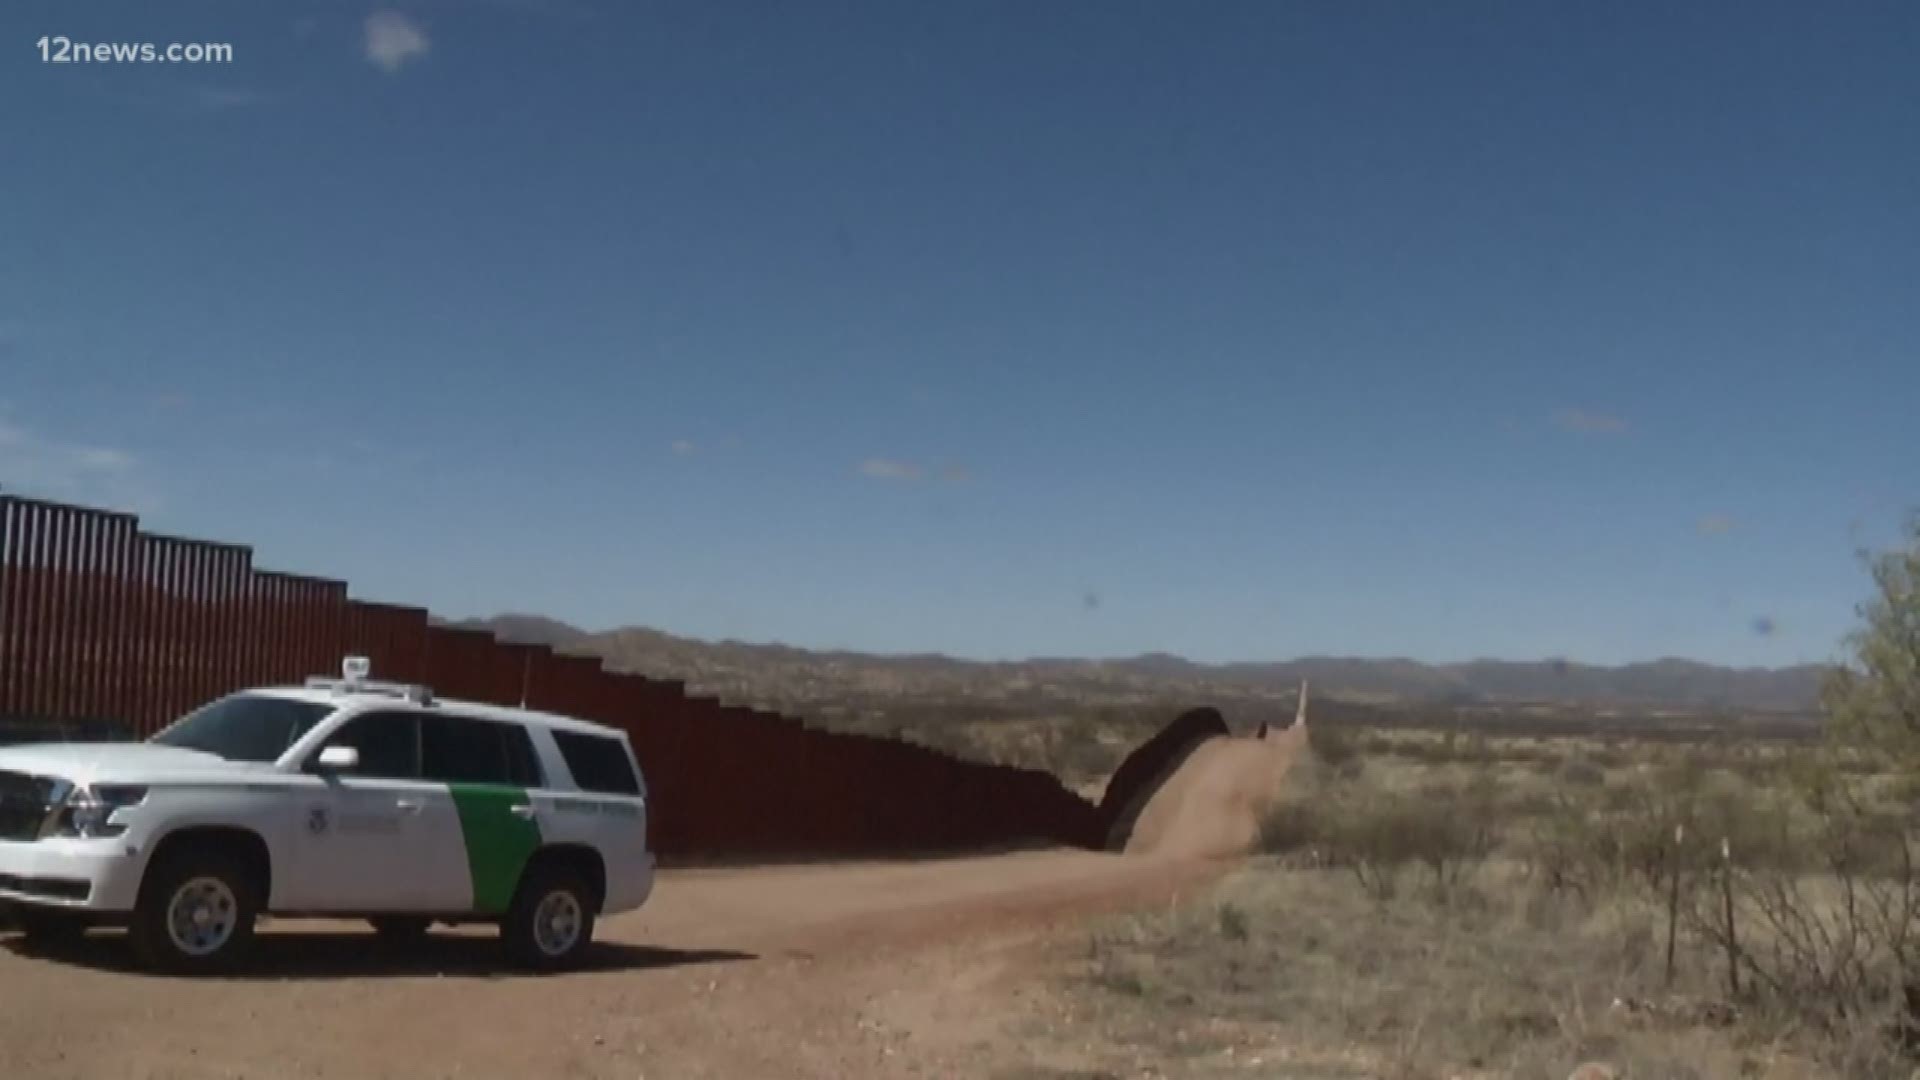 Federal prosecutors say a Border Patrol agent sent racist text messages before using his patrol car to hit a Guatemalan man. According to court documents, agent Matthew Bowen sent texts to a fellow agent reportedly describing migrants as quote "mindless, murdering savages" who are "unworthy of being kindling for a fire."